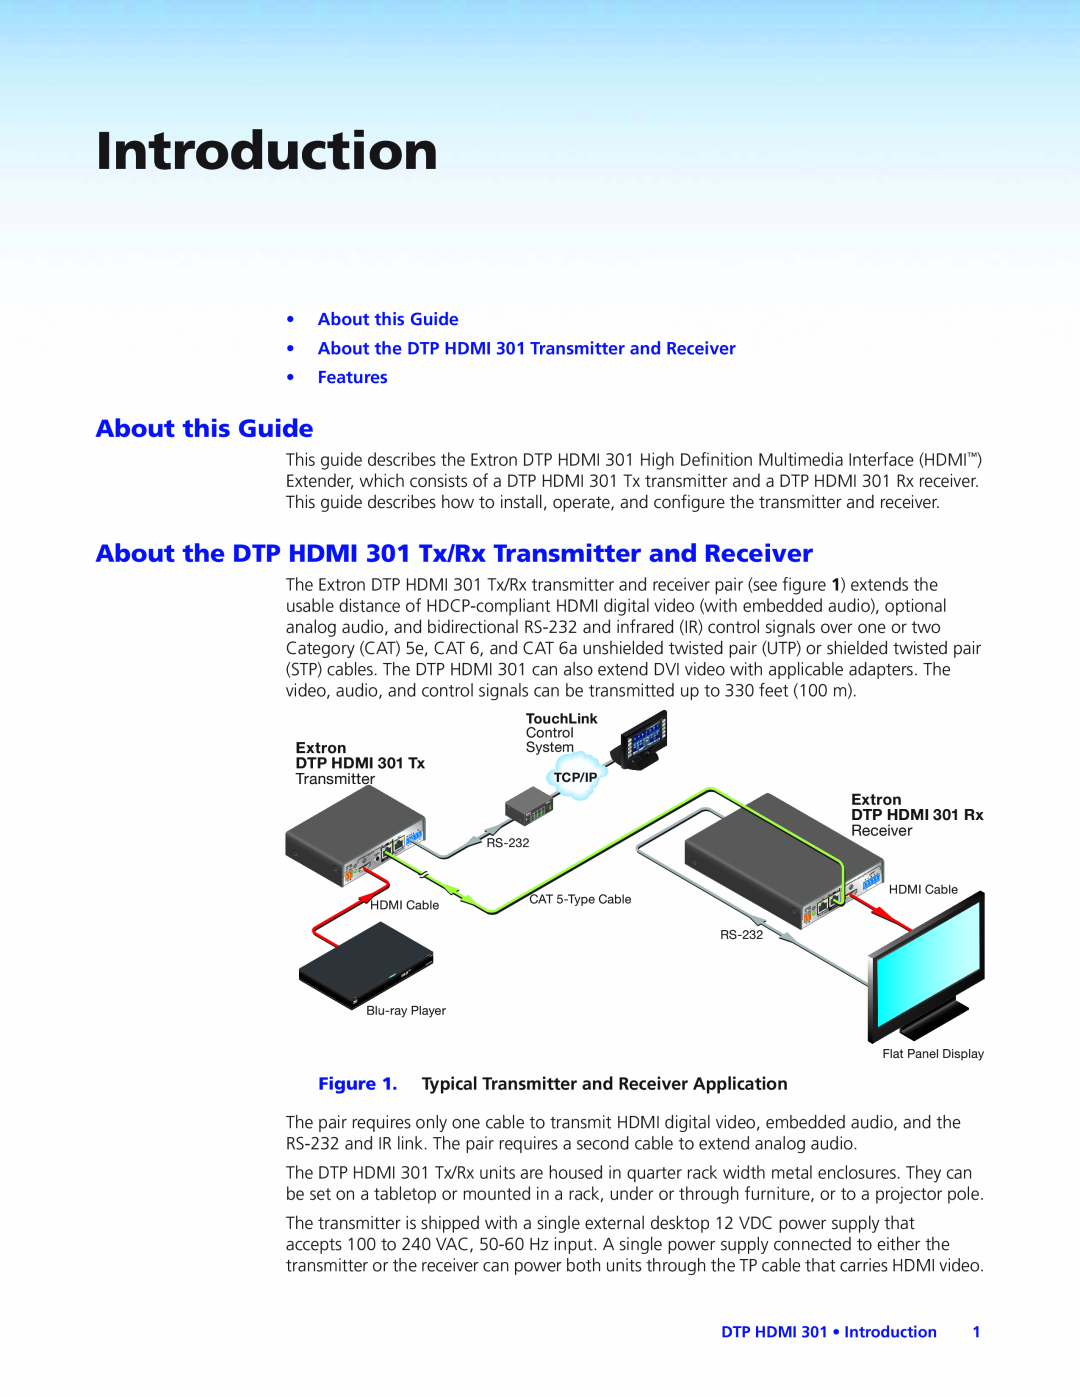 Extron electronic manual Introduction, About this Guide, About the DTP HDMI 301 Transmitter and Receiver, Features 